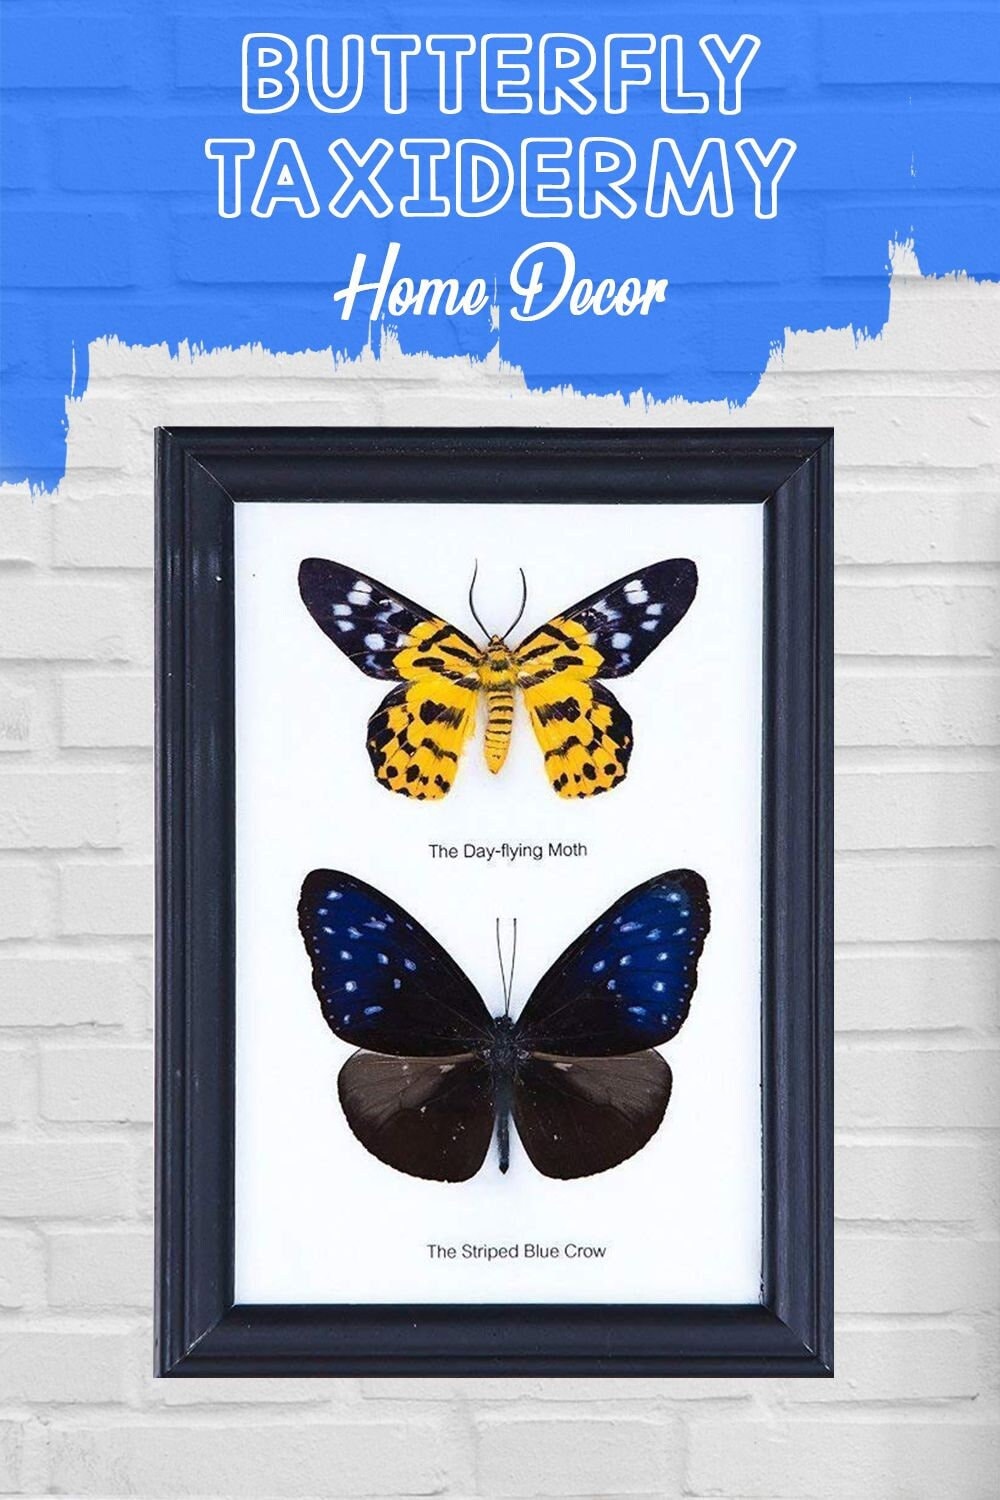 2 Butterflies Framed | Assorted Various Ethical Butterfly Specimens Mounted Under Glass in a Wall Hanging Frame 7 x 5 In. Gift Boxed